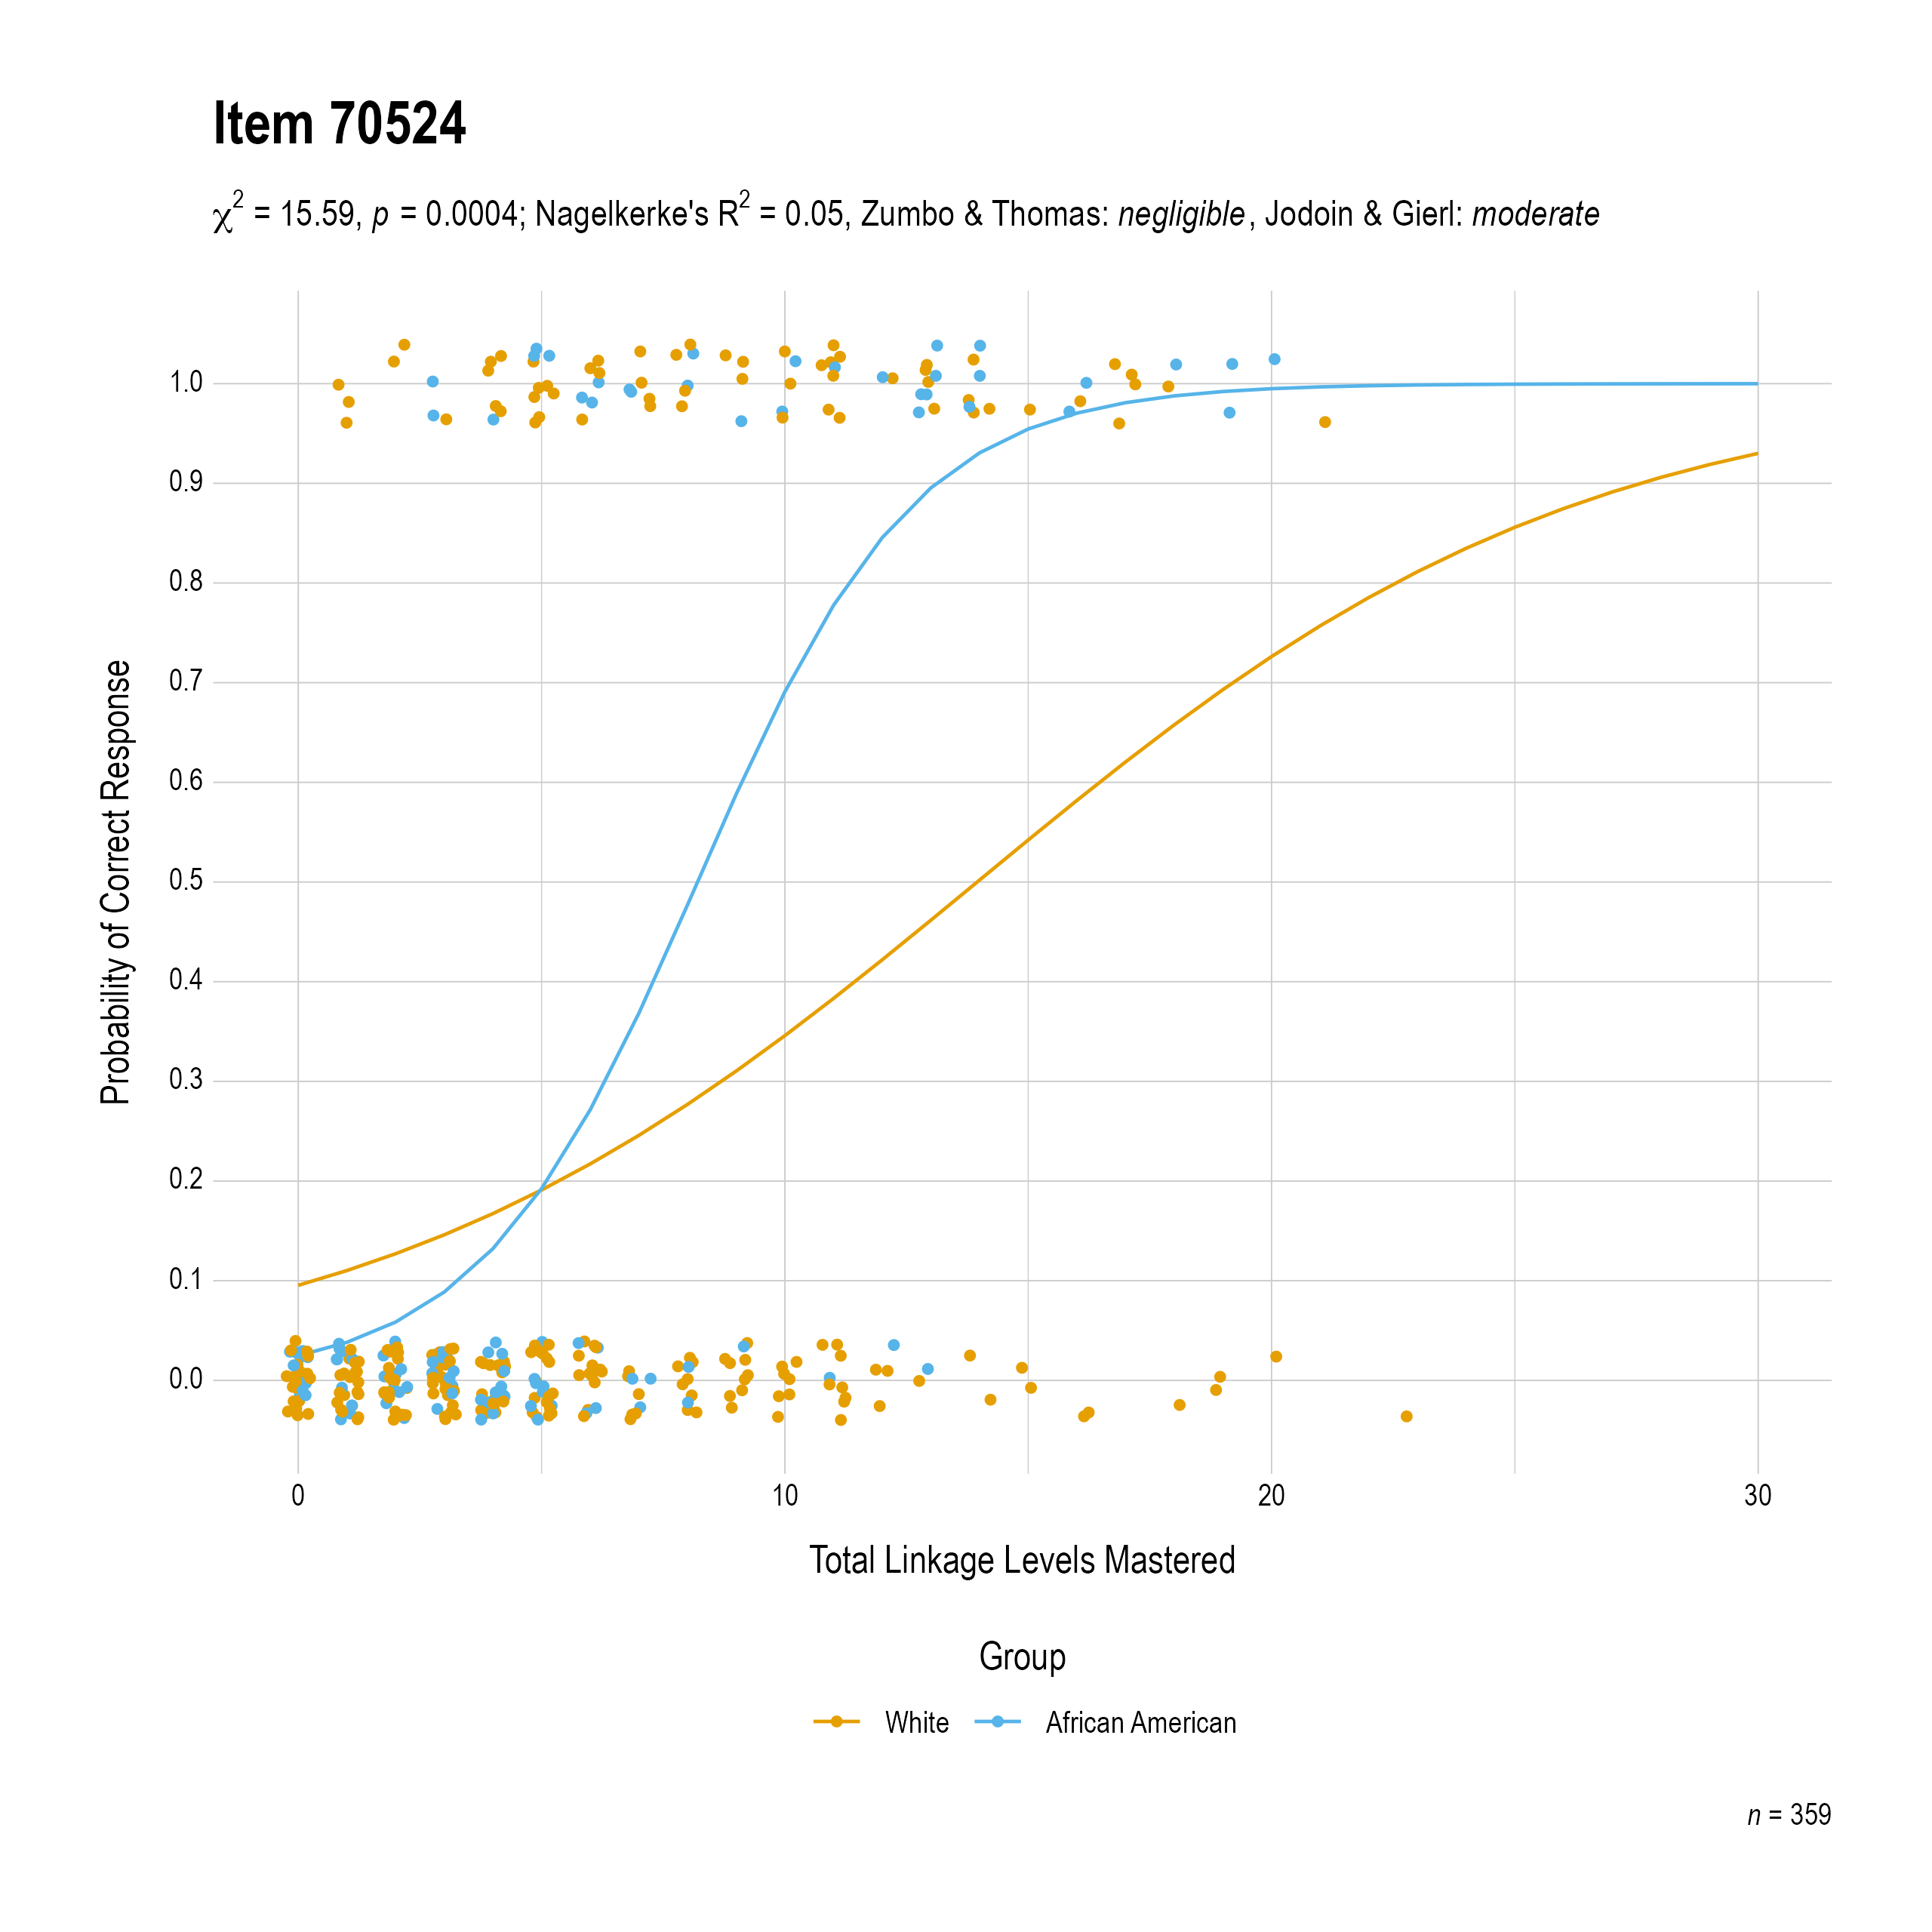 The plot of the combined race differential item function evidence for English language arts item 70524. The figure contains points shaded by group. The figure also contains a logistic regression curve for each group. The total linkage levels mastered in is on the x-axis, and the probability of a correct response is on the y-axis.